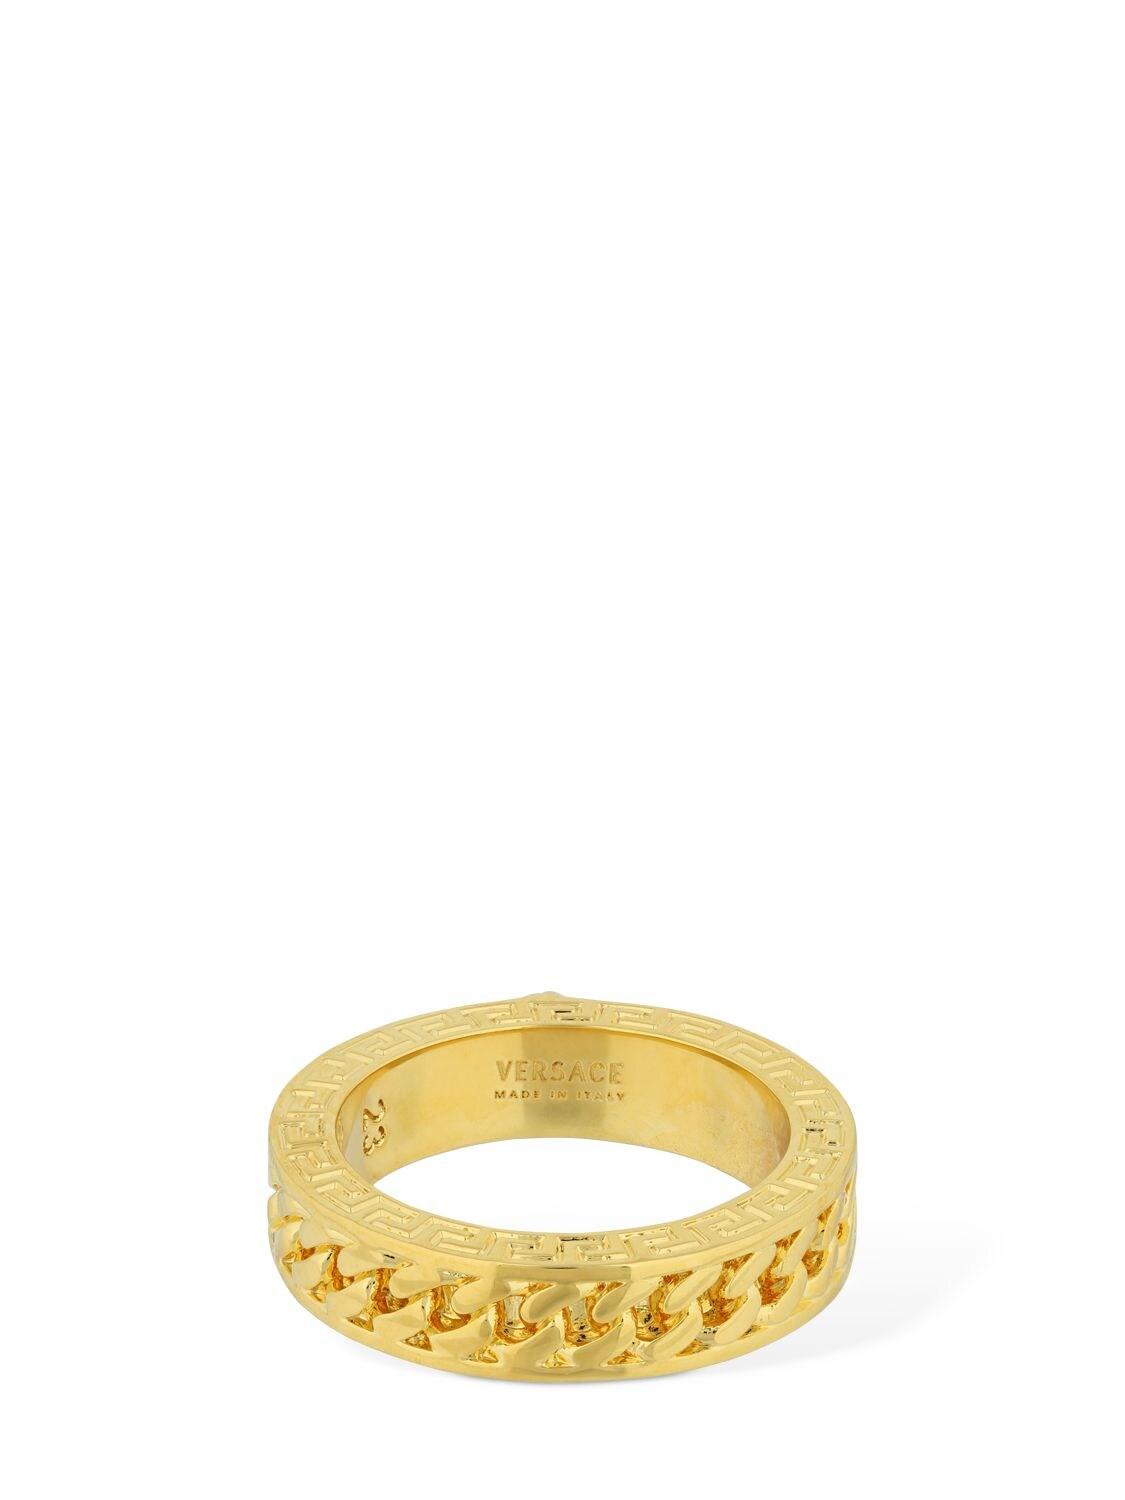 Versace Medusa Chained Ring in Metallic for Men | Lyst